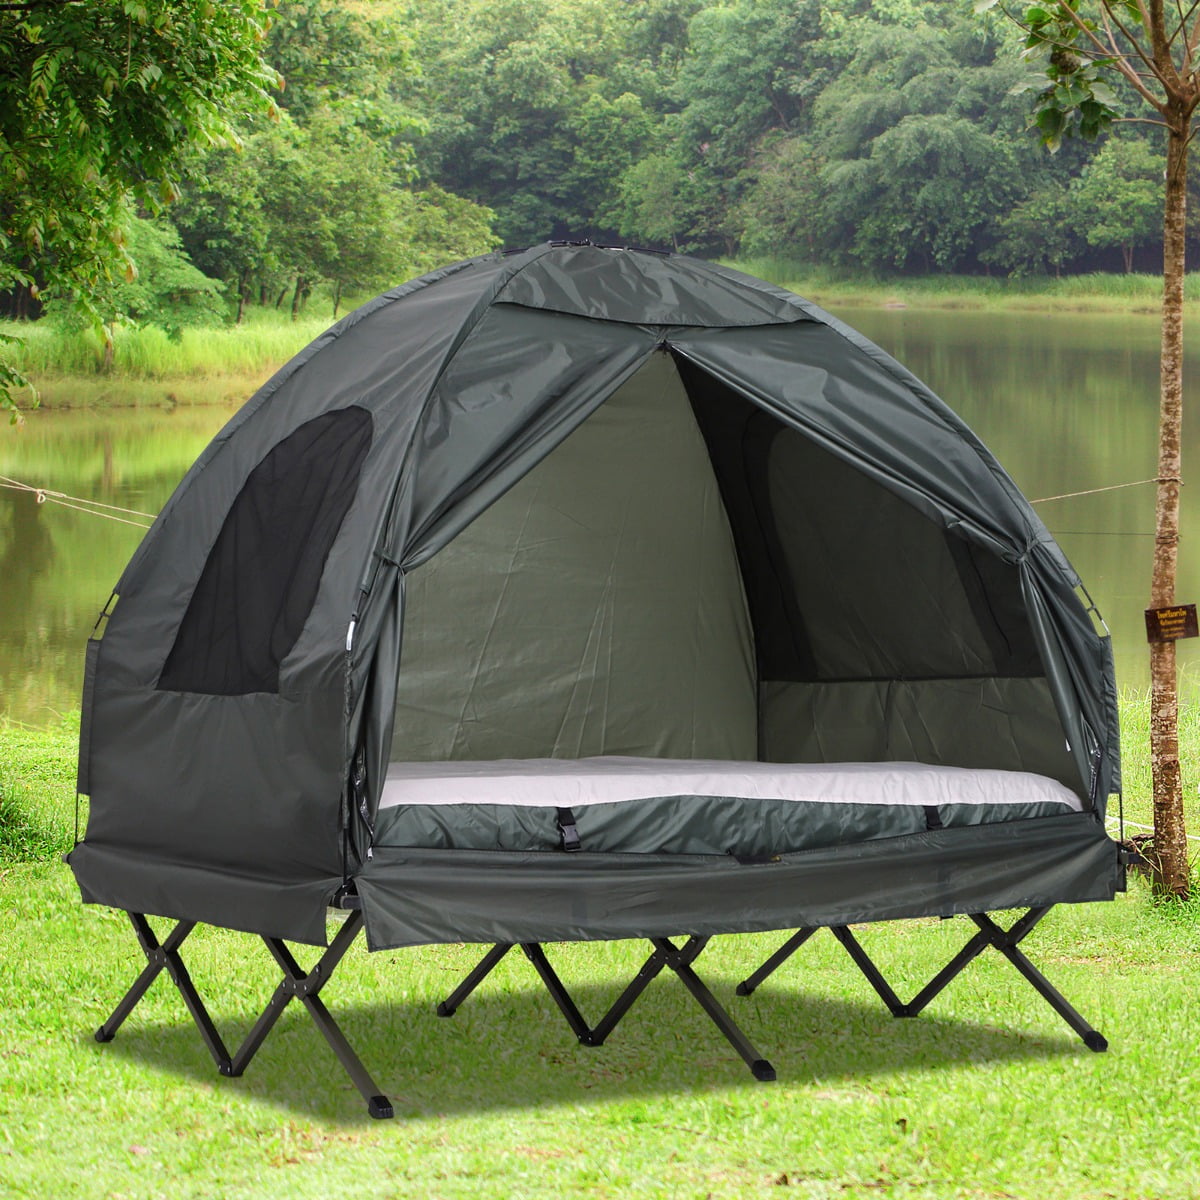 COFFEE One size KingCamp Unisexs Camping Tent